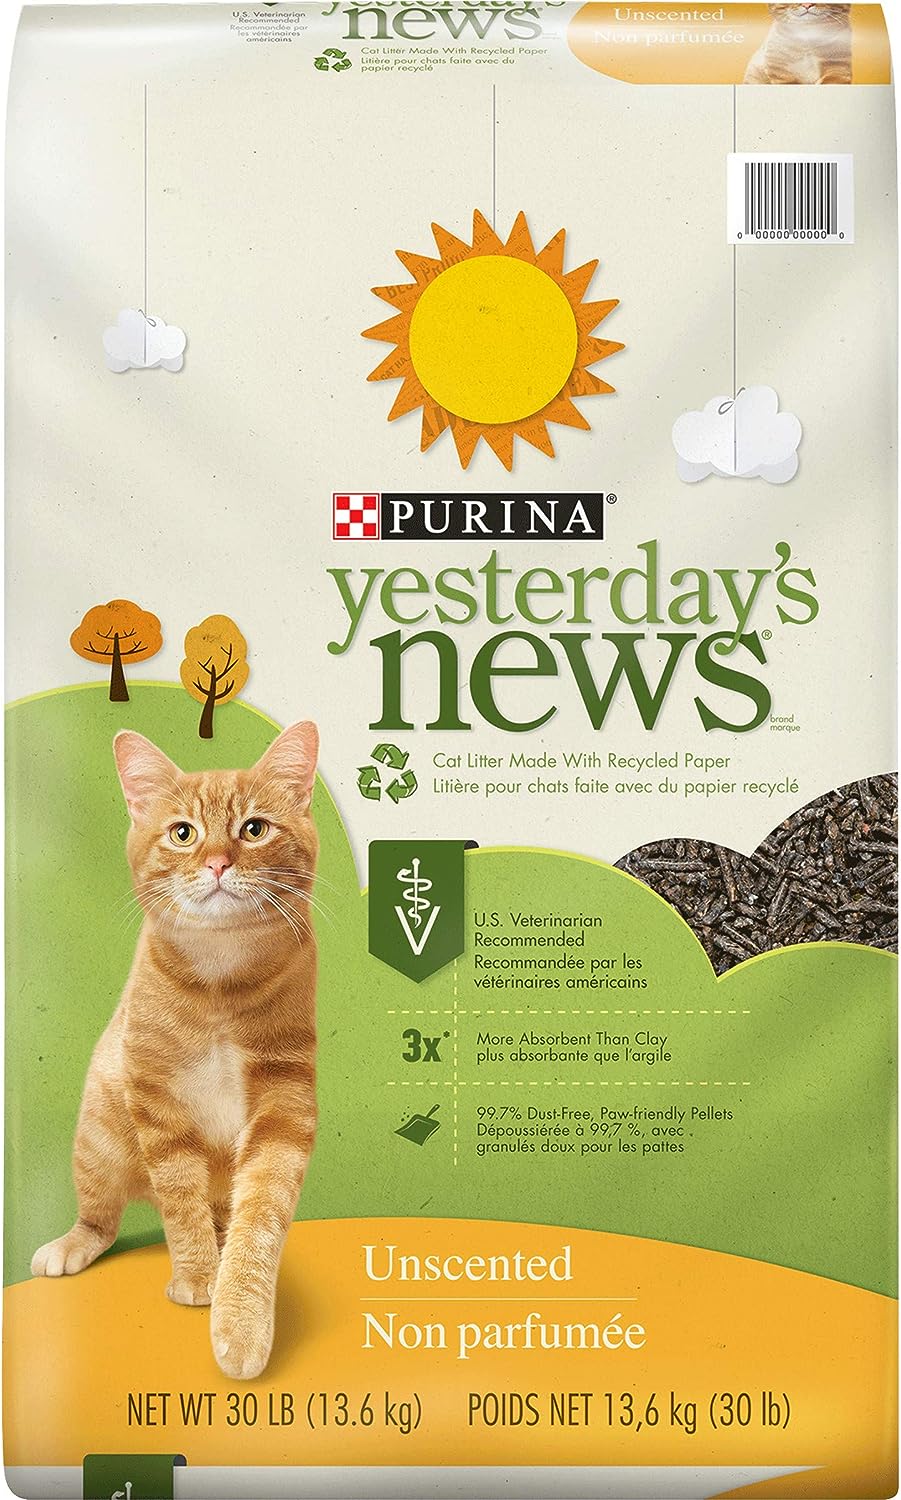 Purina Yesterday’s News Unscented Paper Cat Litter